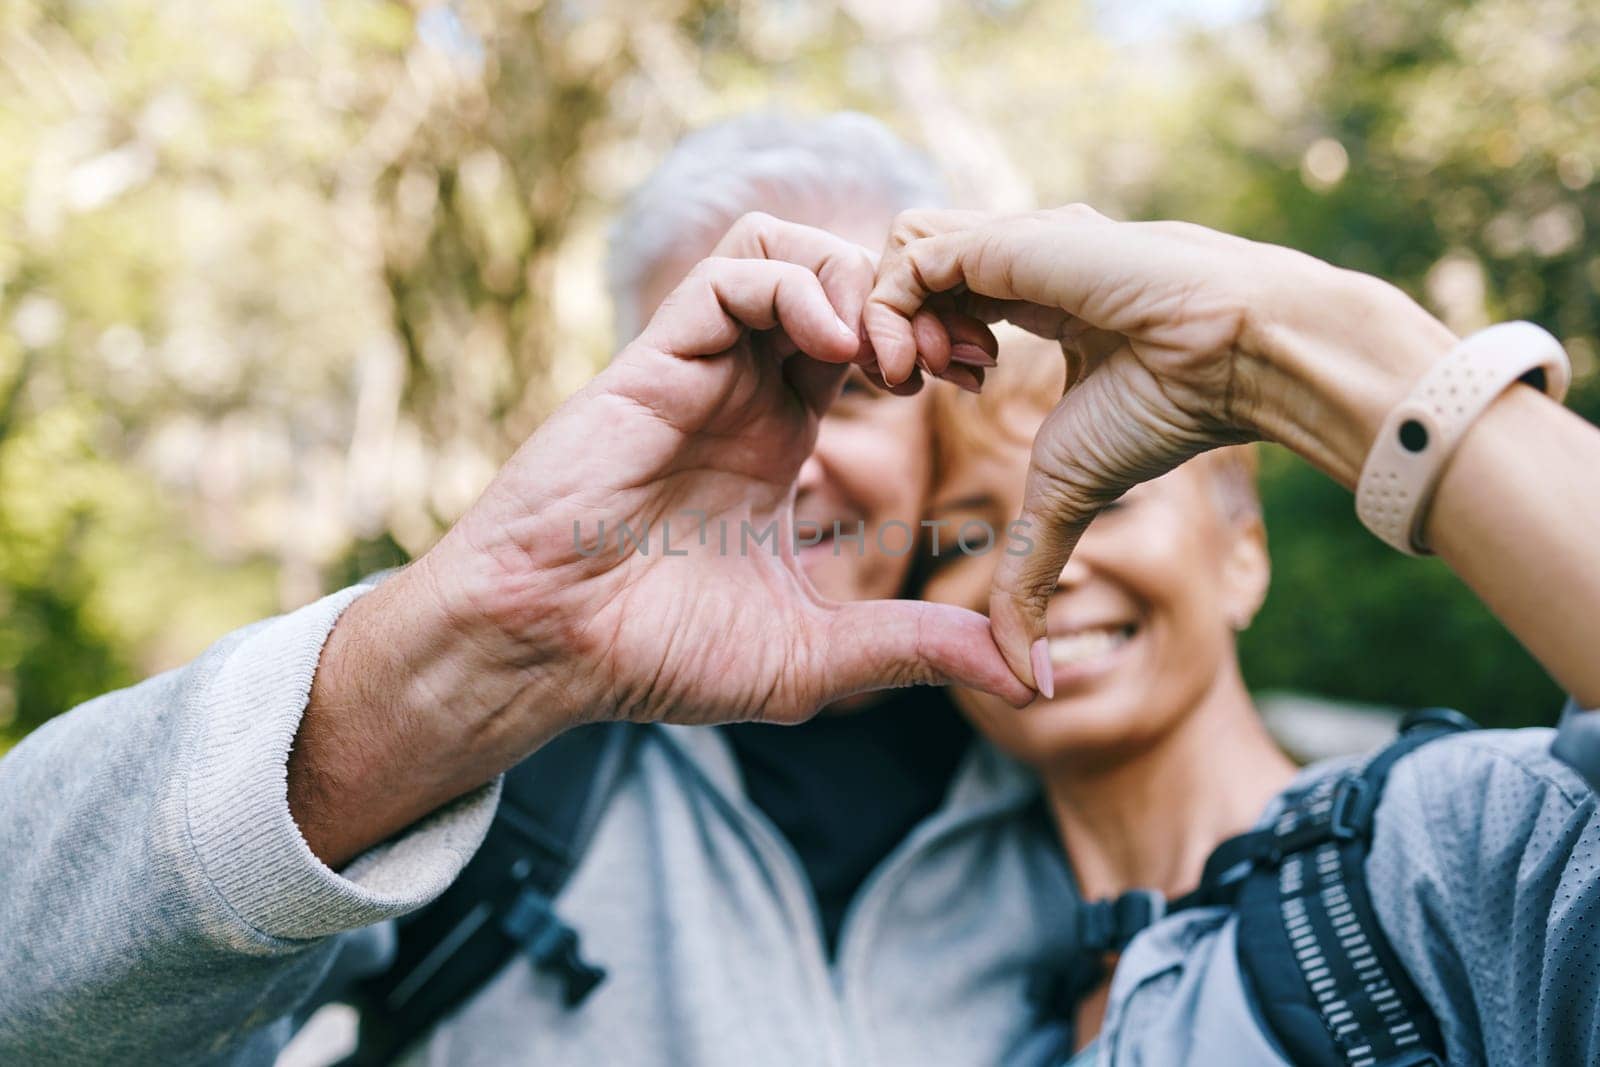 Heart, love hands and senior couple outdoors on vacation, holiday or hiking trip. Affection sign, romance emoji and elderly interracial couple, man and woman bonding together in nature on a hike